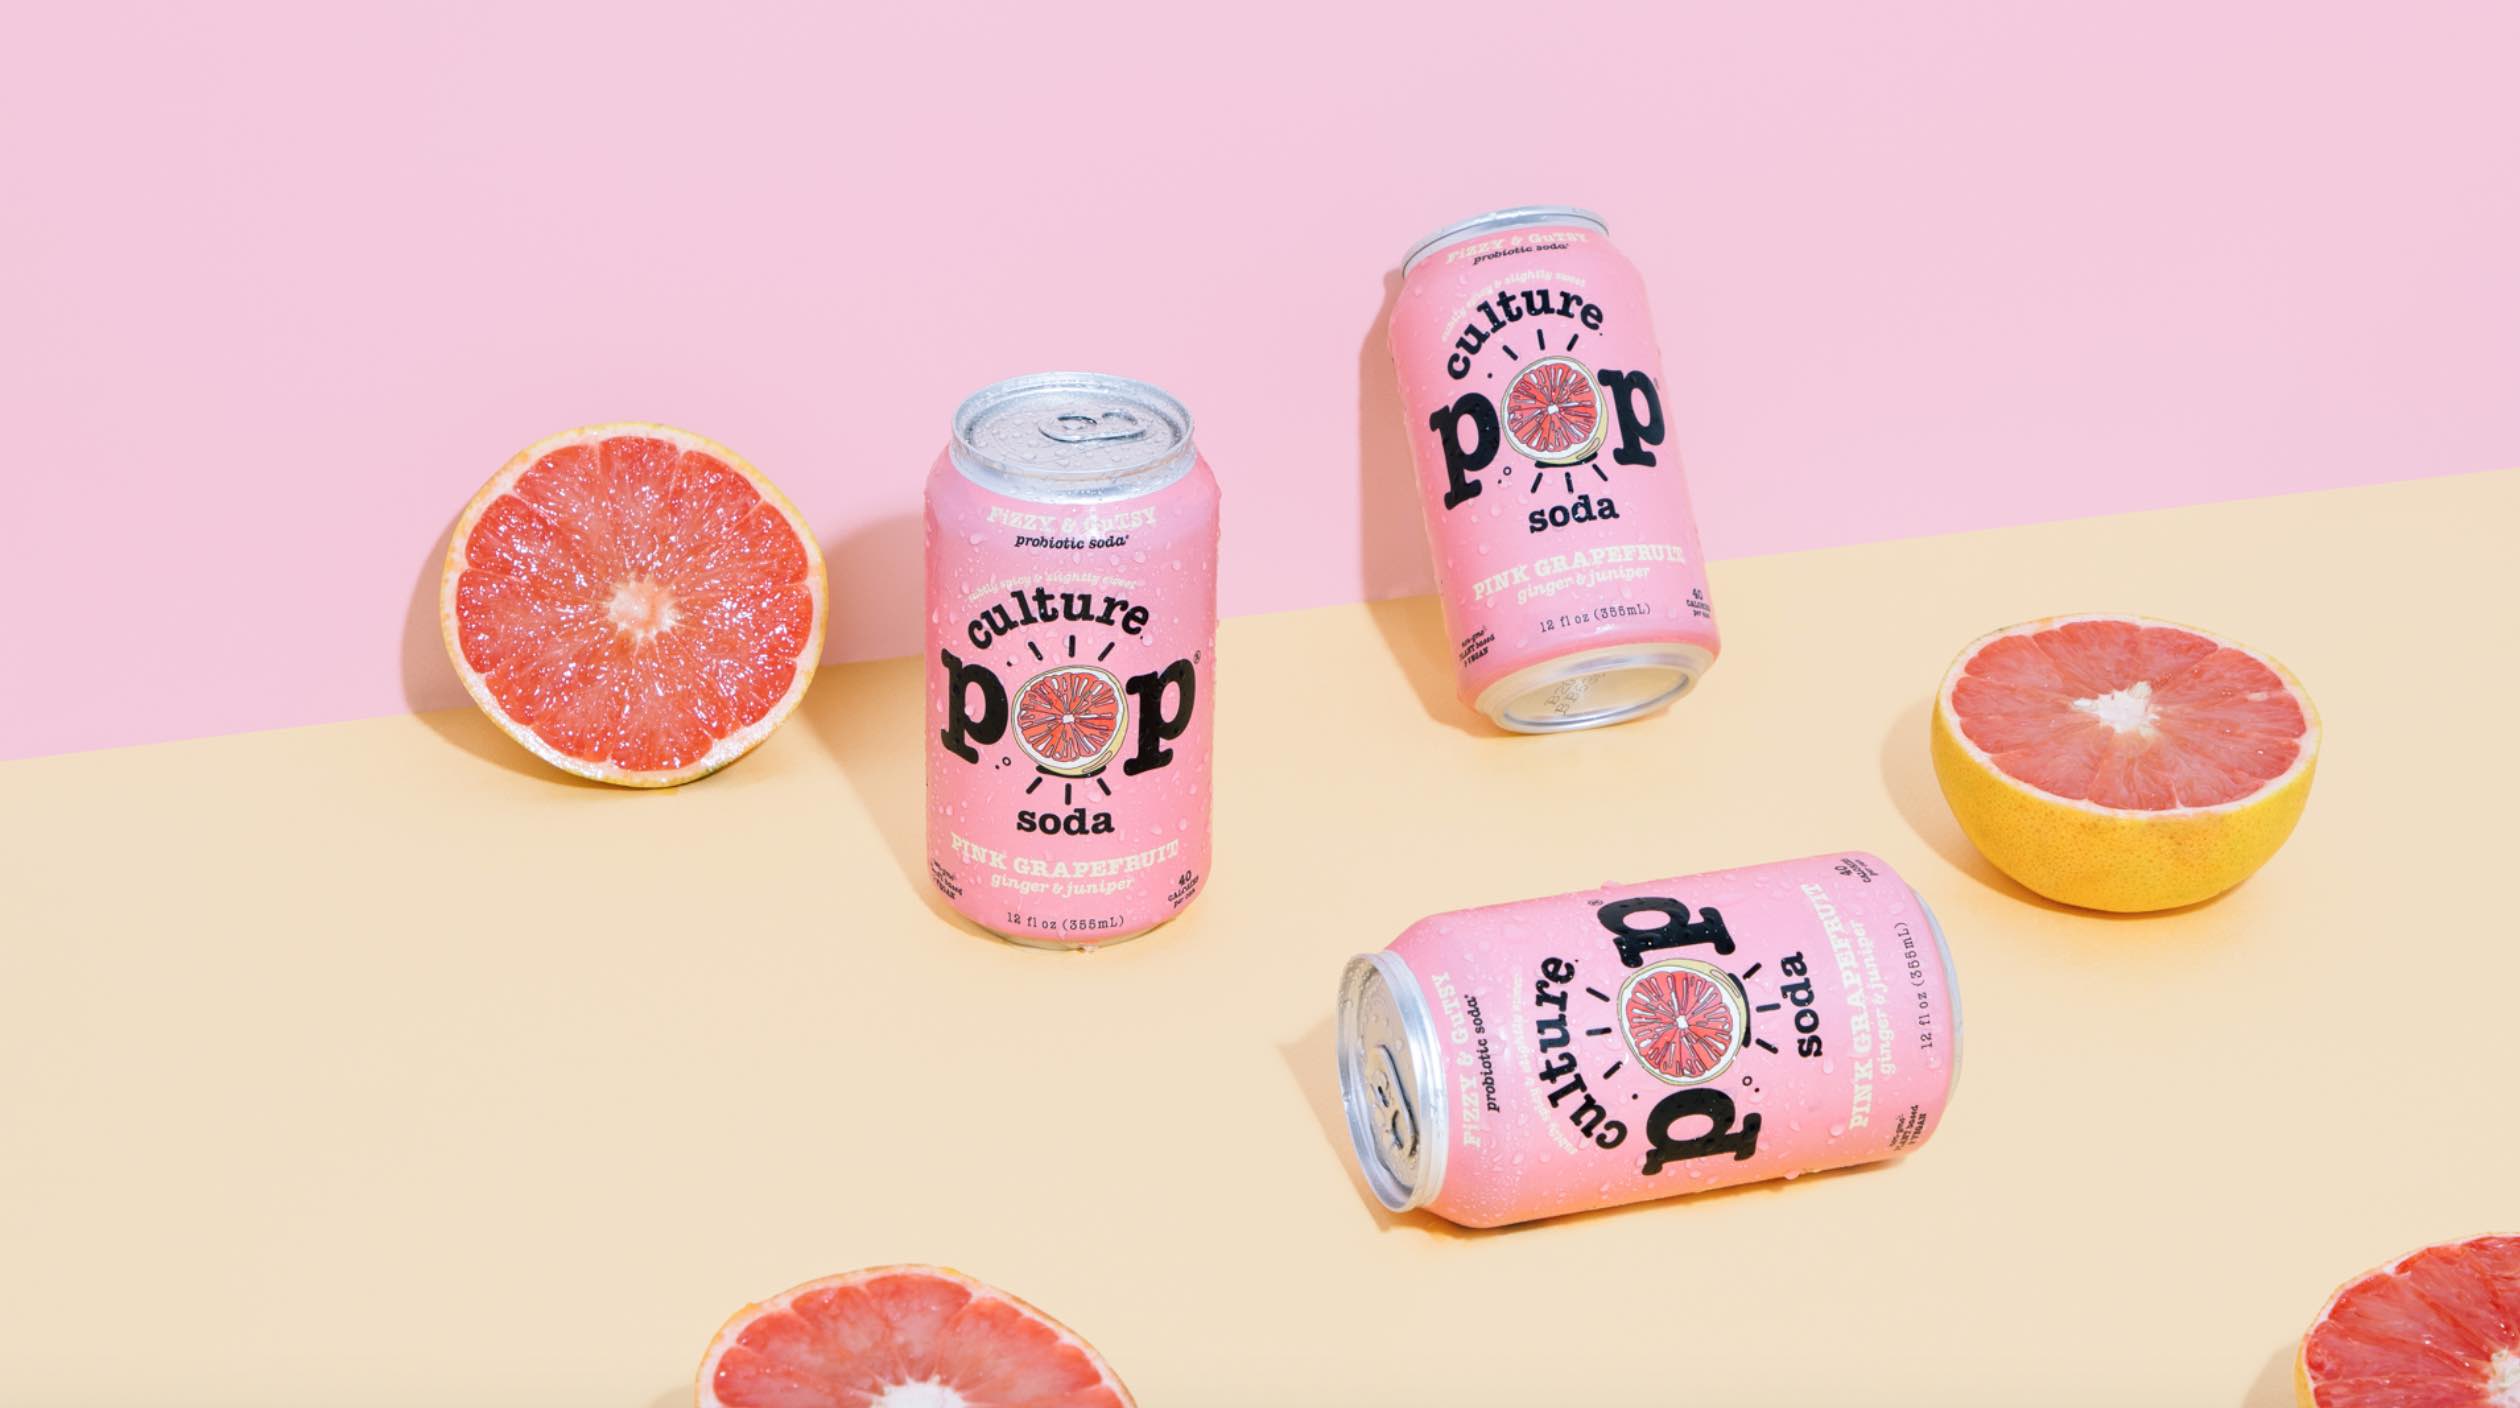 ROOK/NYC Co-Creates a Real Soda that POPs